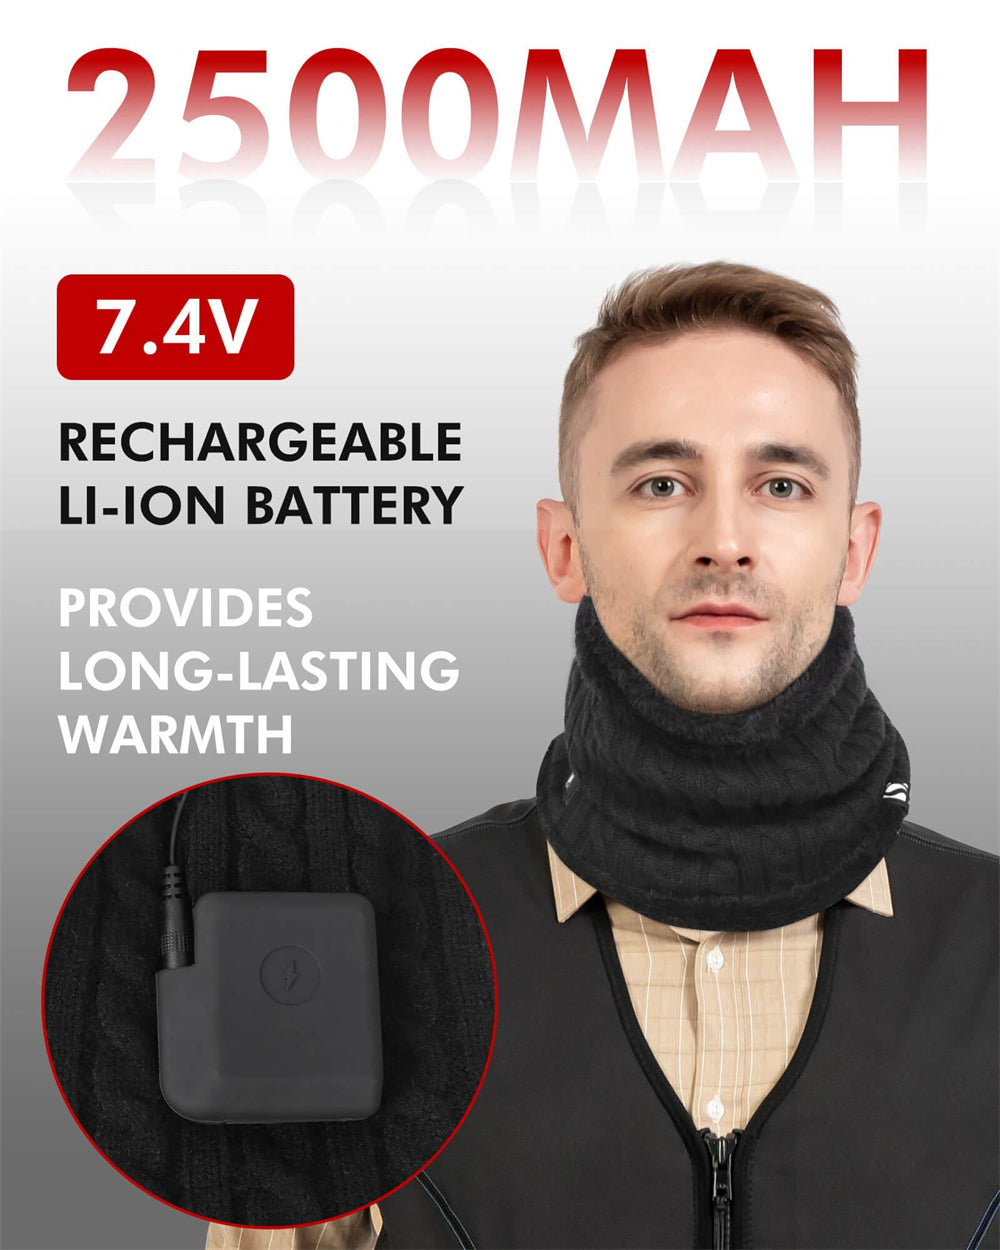 dukuseek heated gaiter comes with a 2500mah battery and a charger